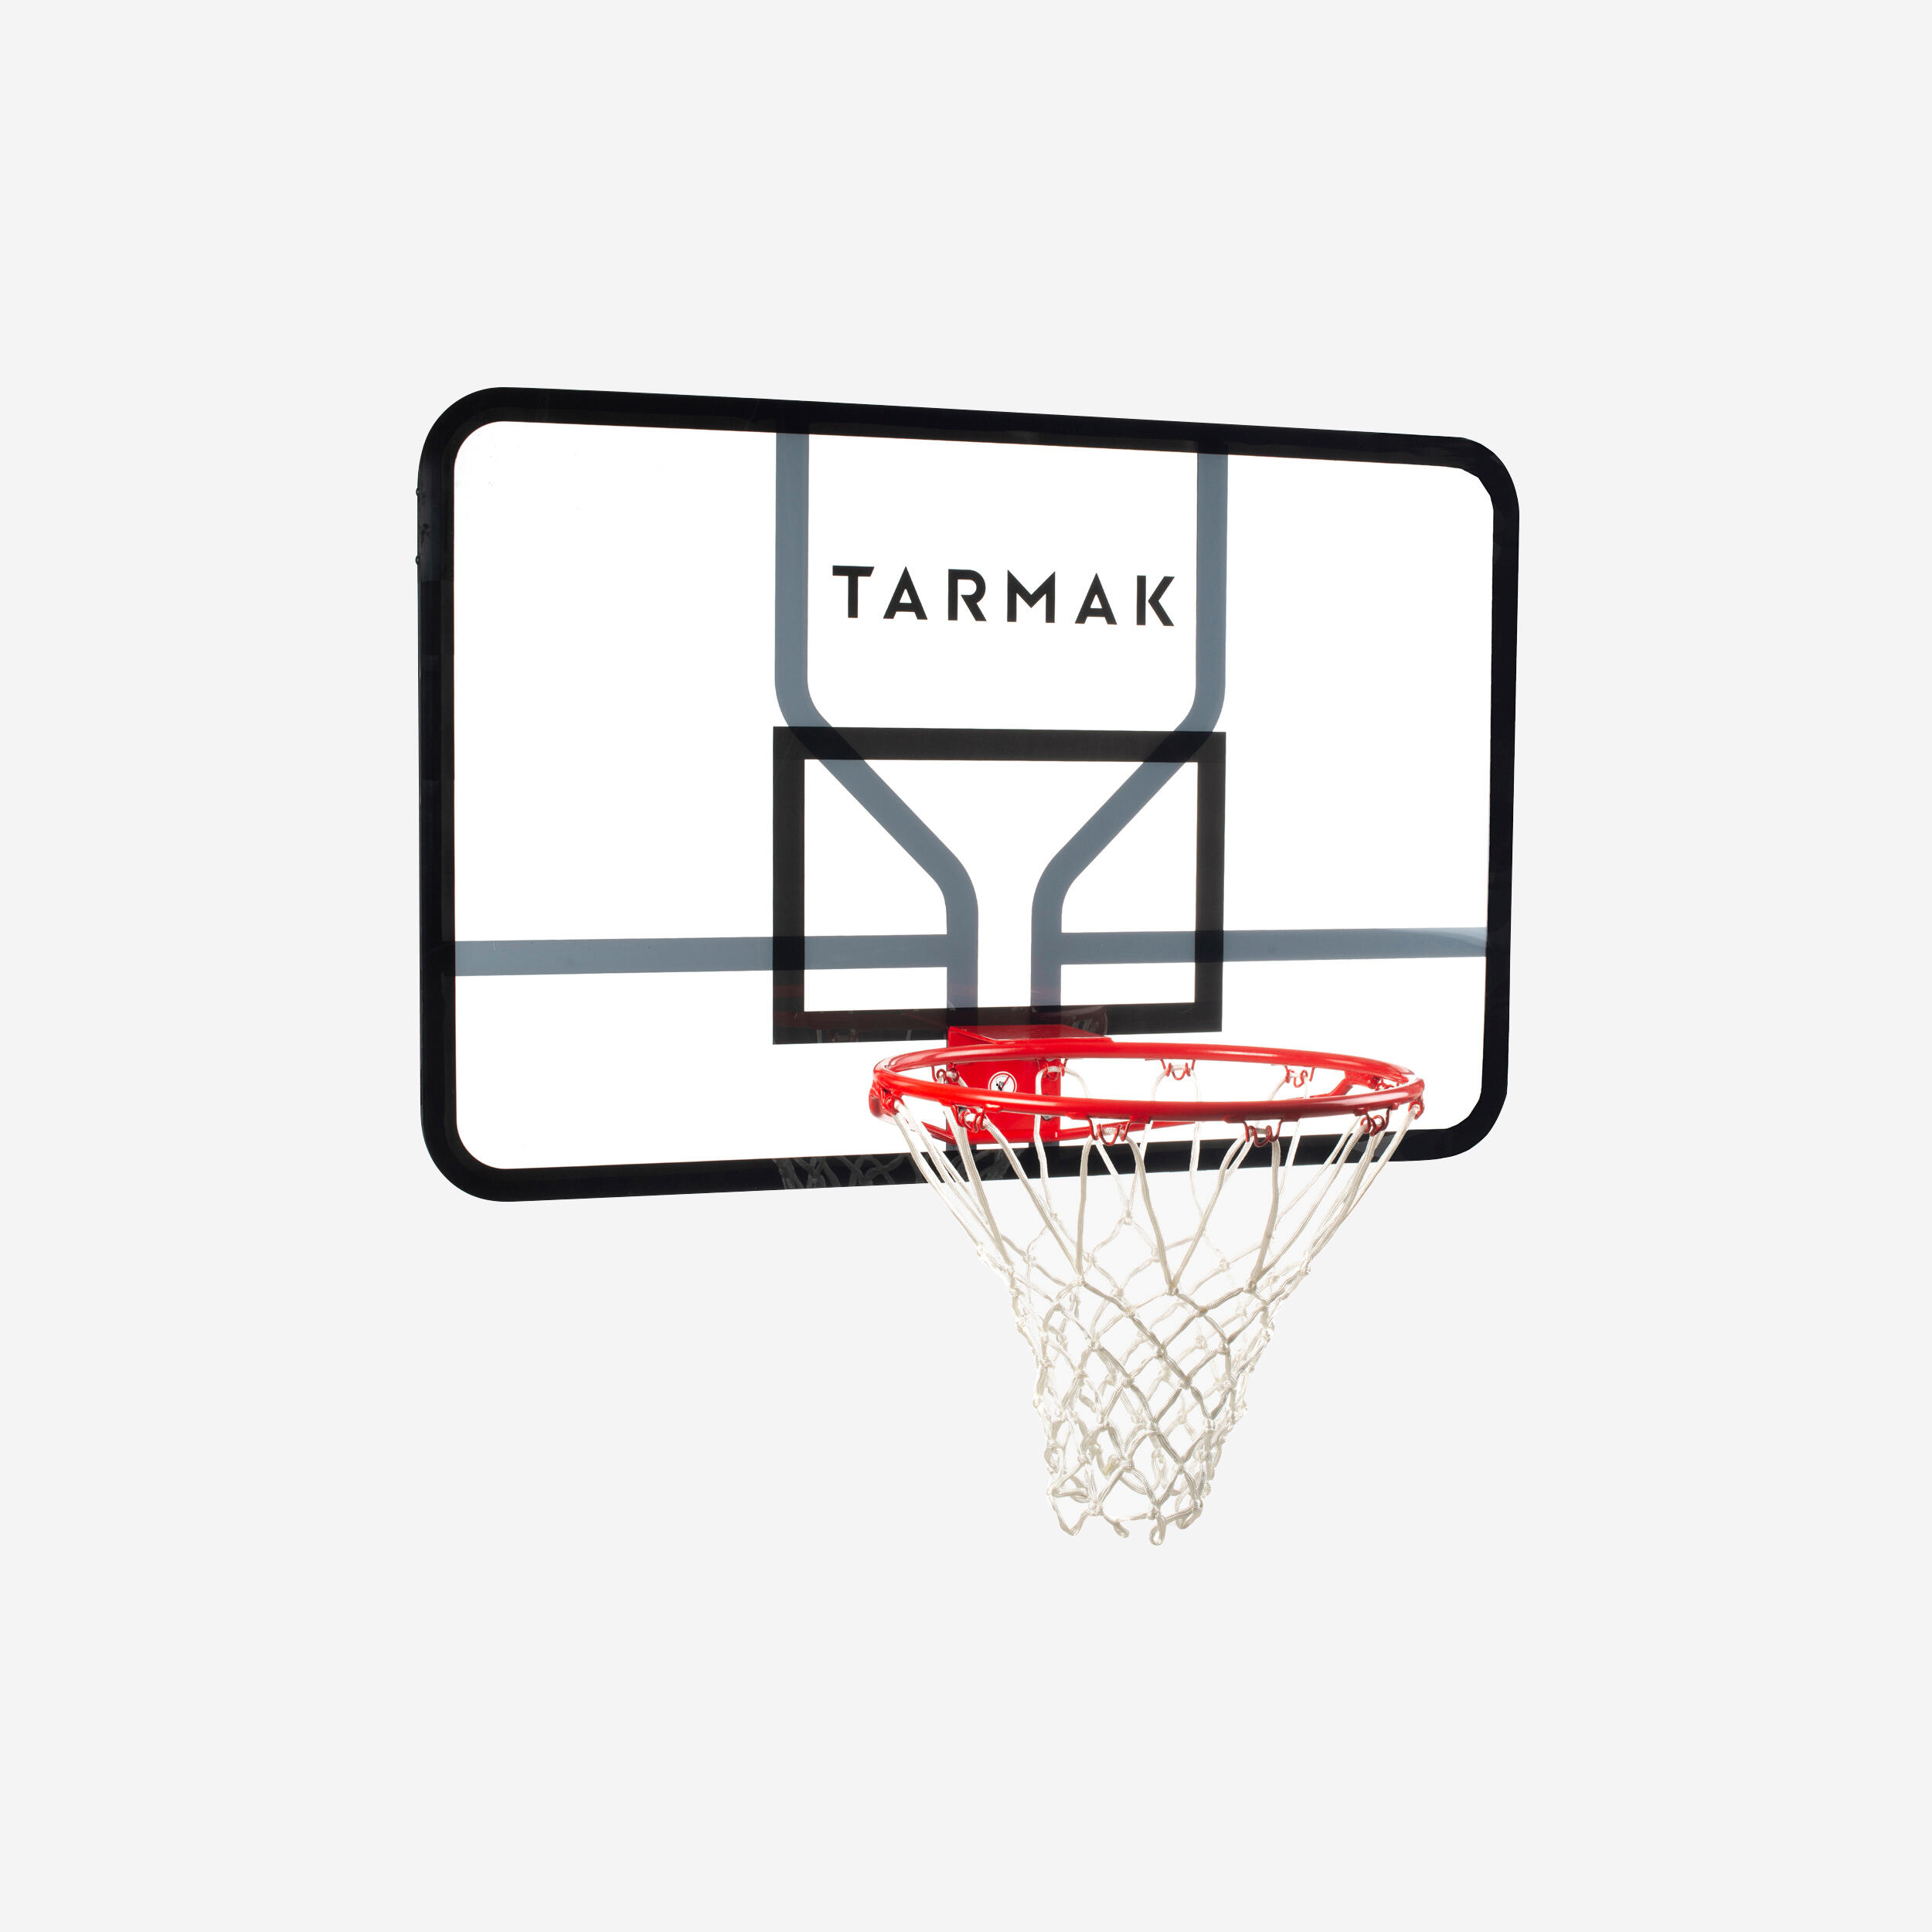 Children's Wall Mounted Transparent Basketball Backboard with Basketball and Pump Maximum Applicable Ball Diameter is 5 inches 